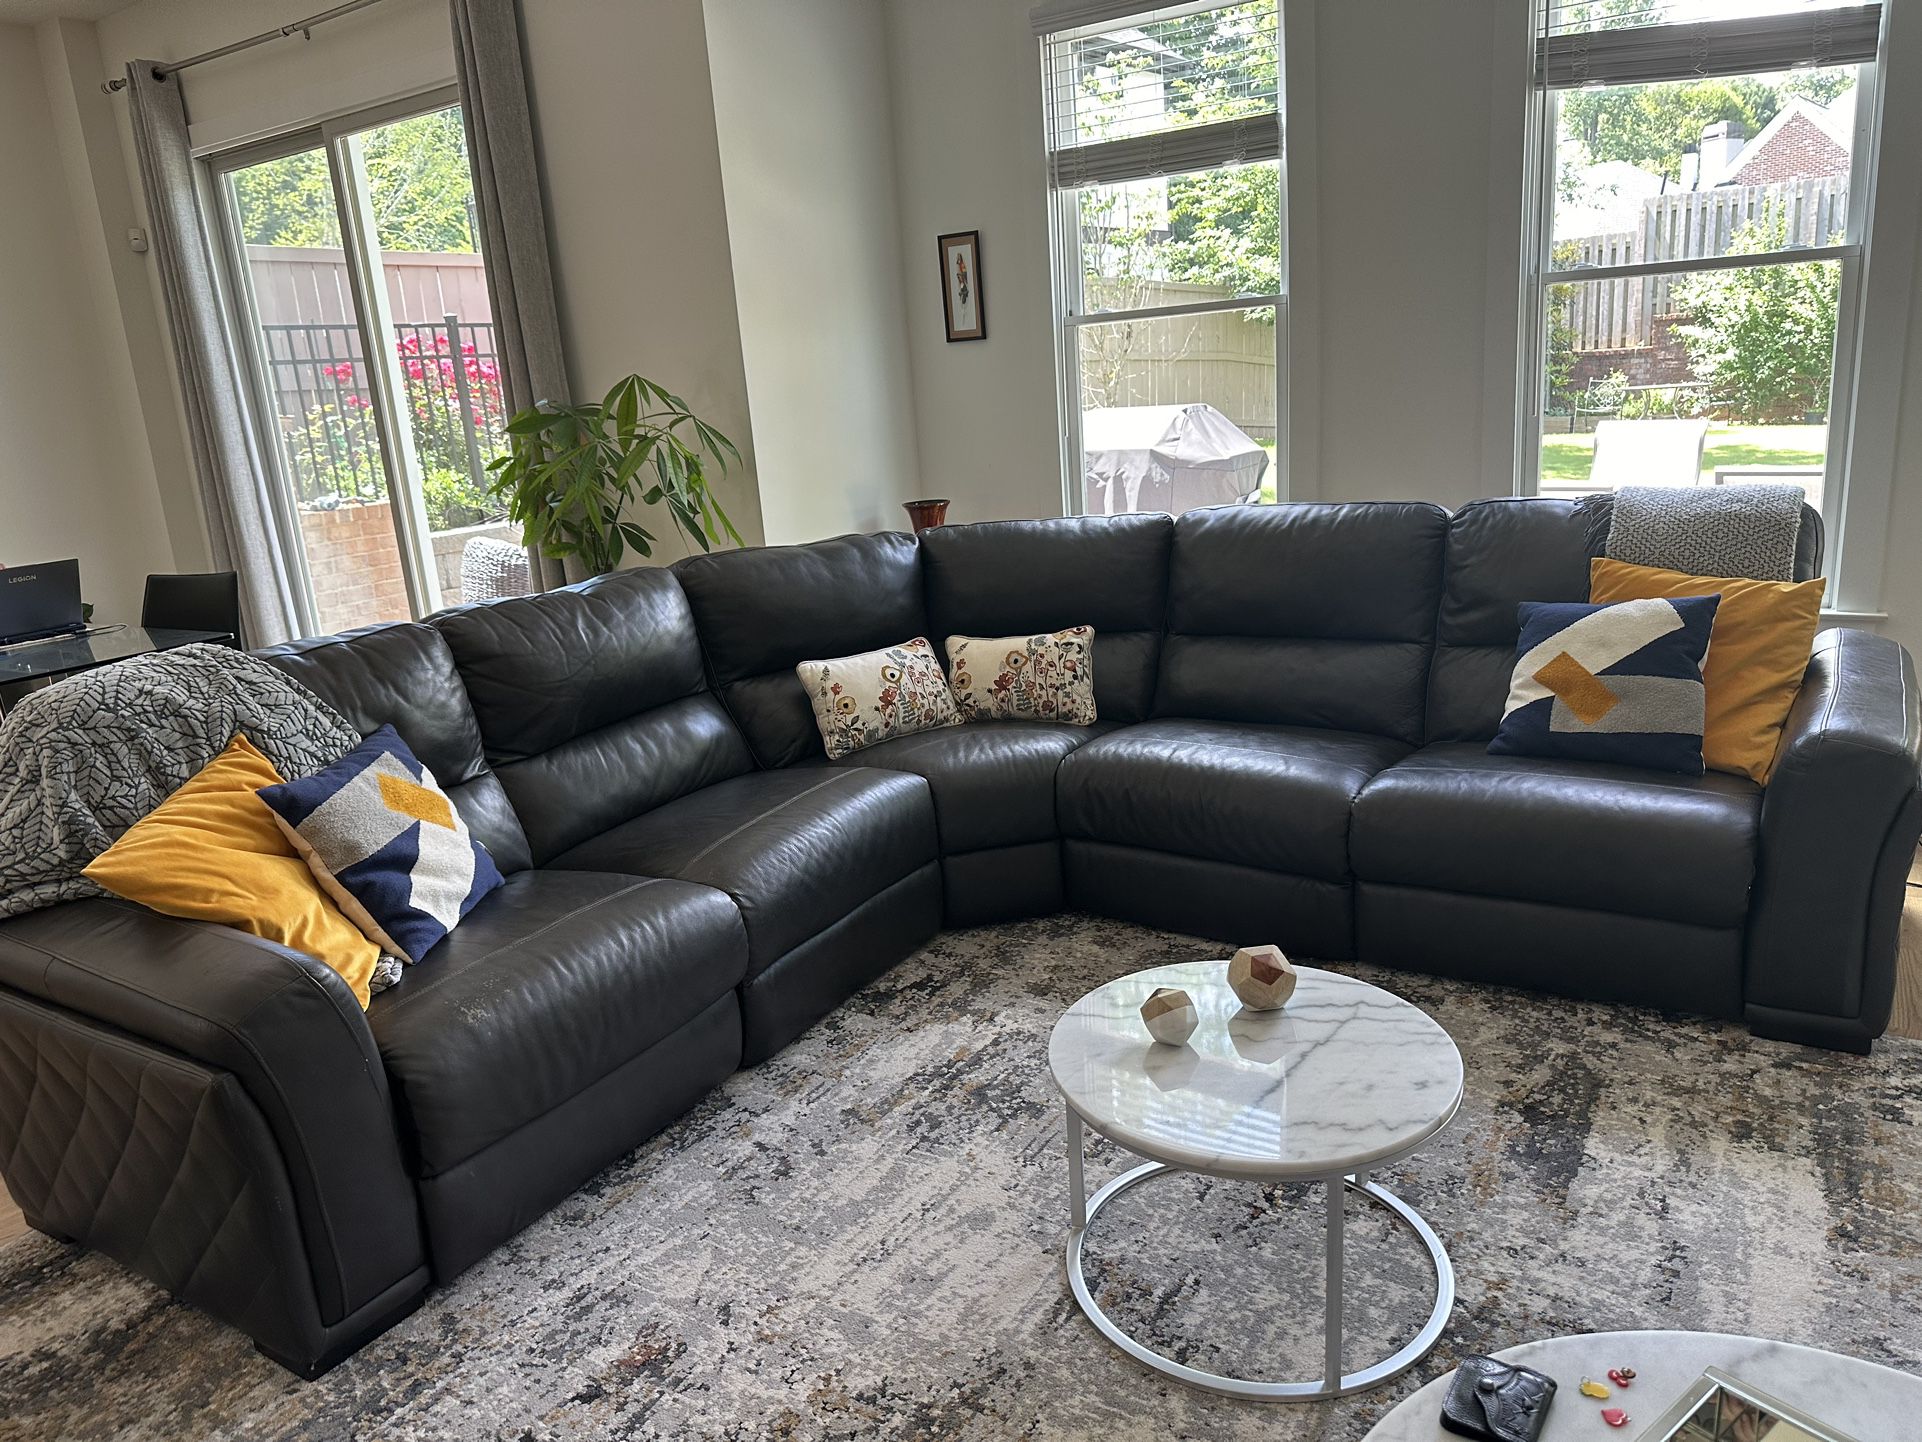  Leather Sectional From Macy’s 